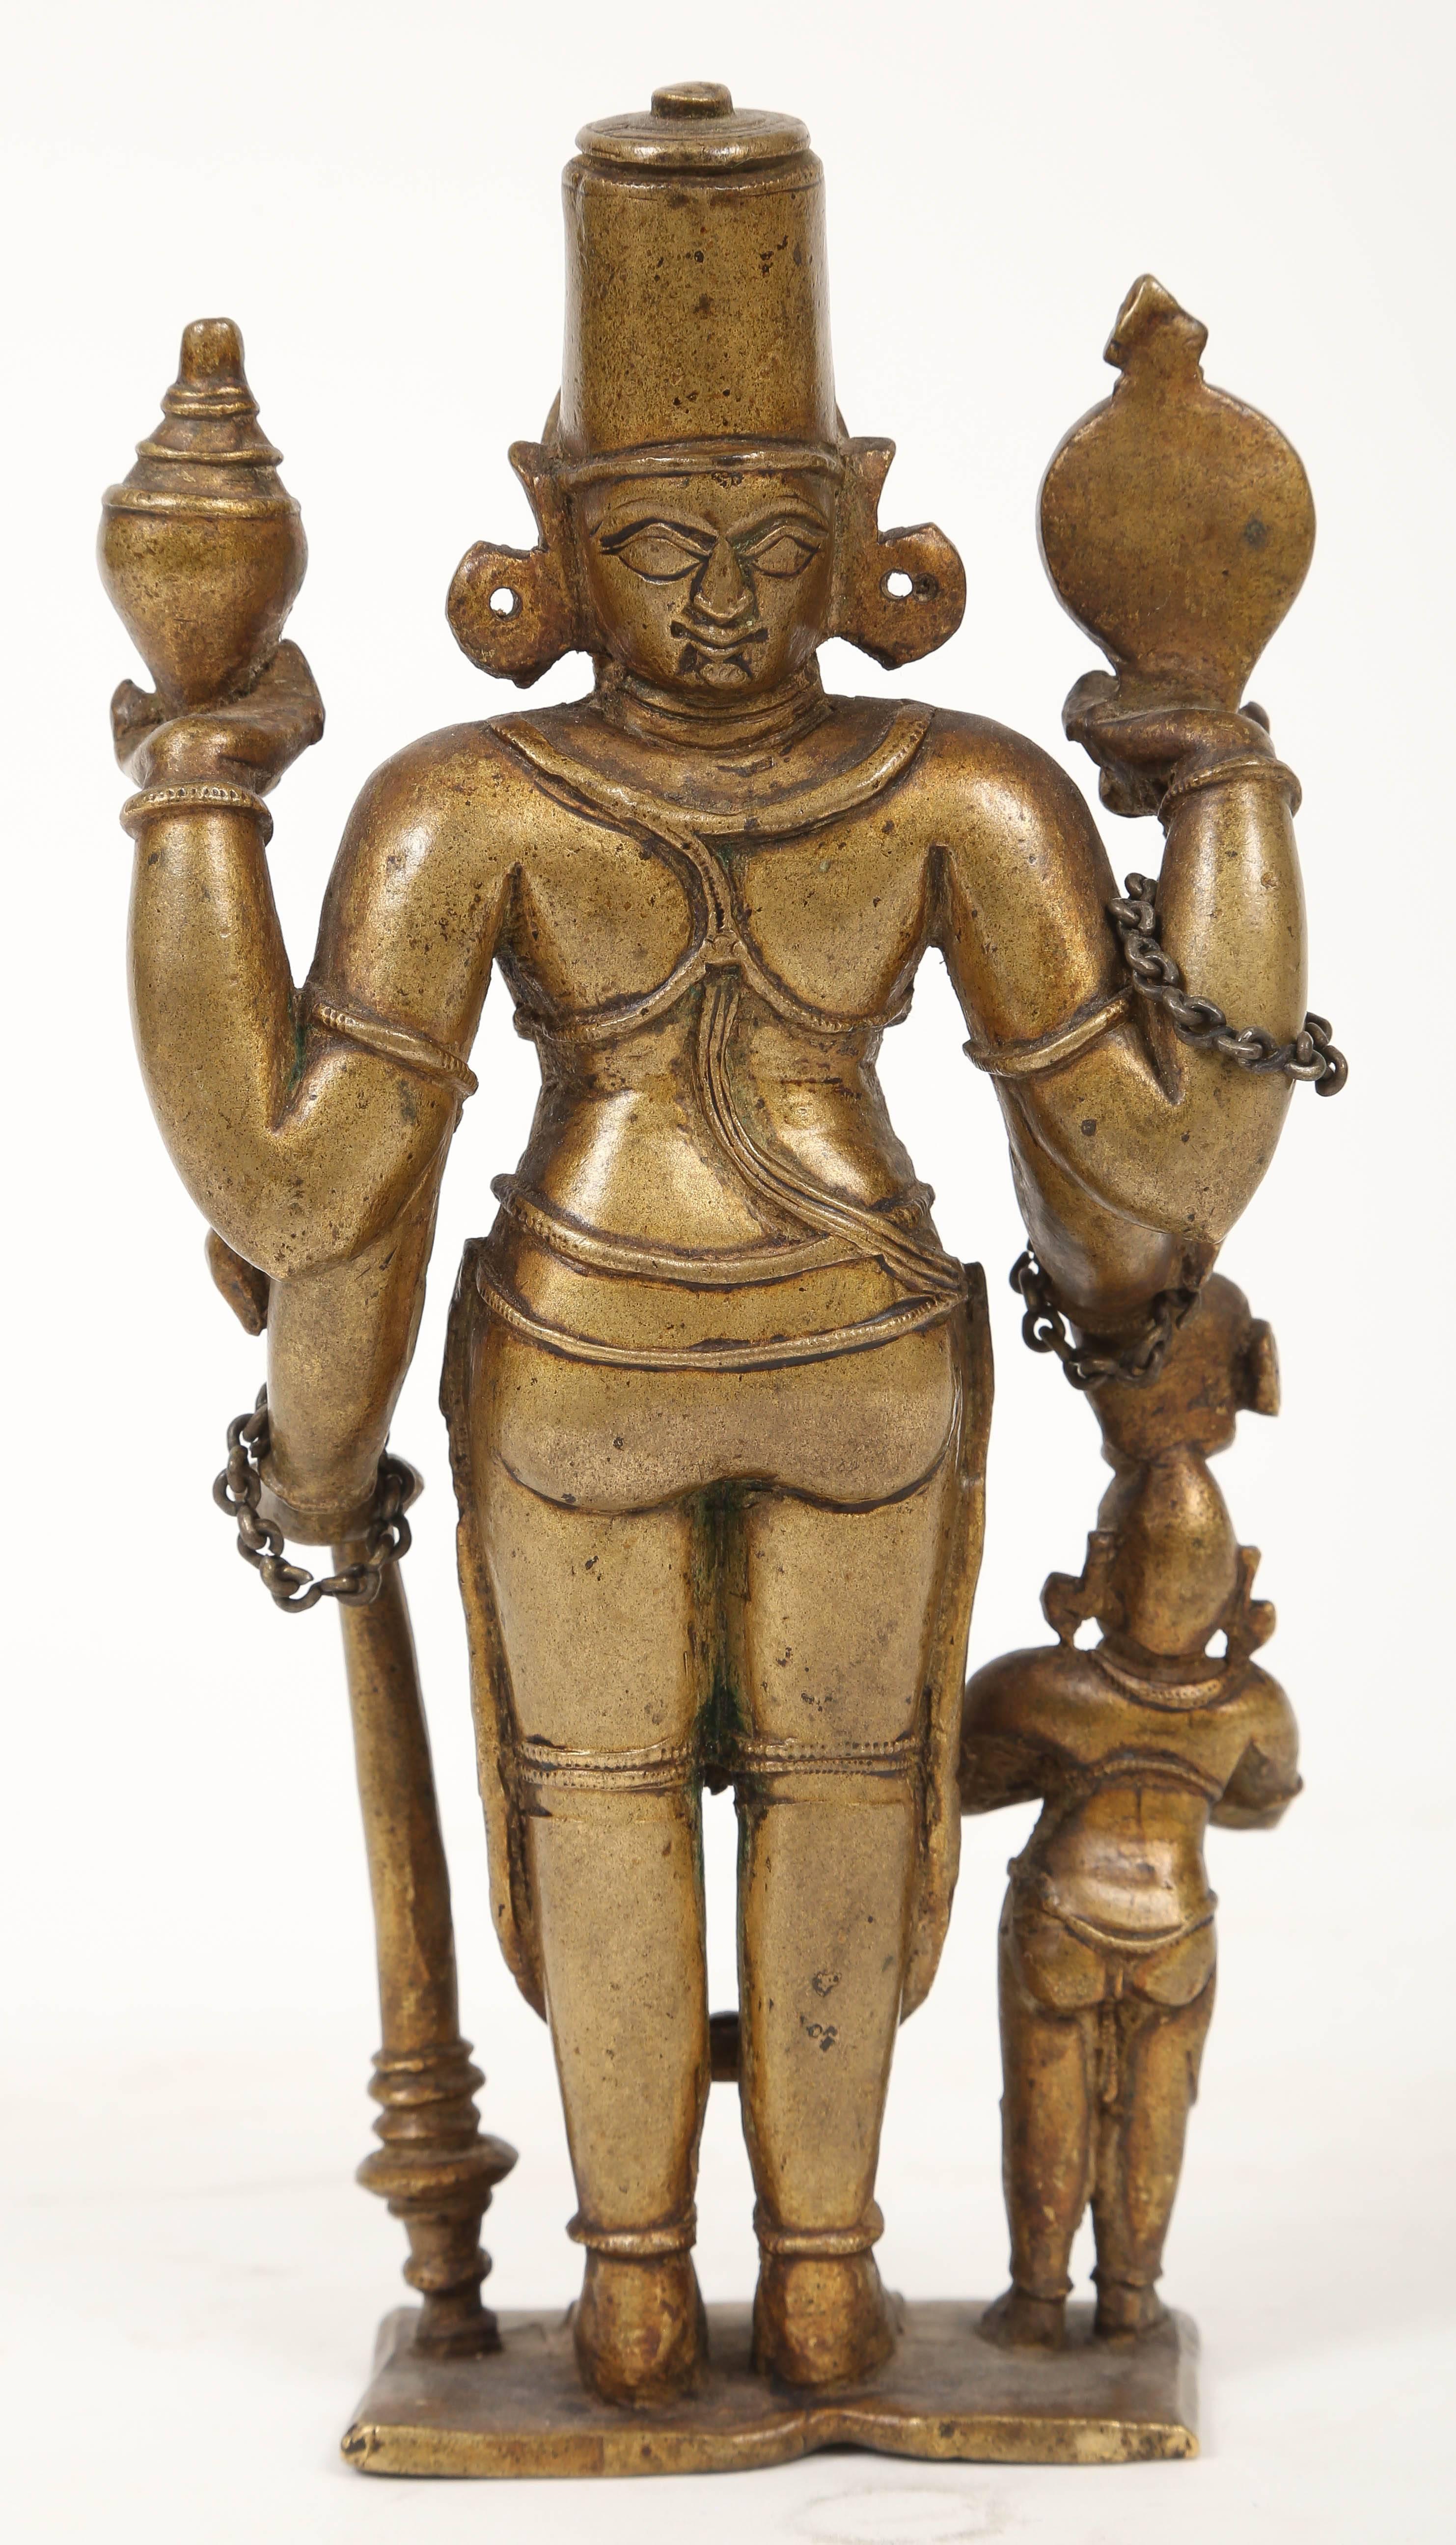 18th Century and Earlier Bronze Statuette of Lord Vishnu and the Goddess Lakshmi, Indian, 18th Century